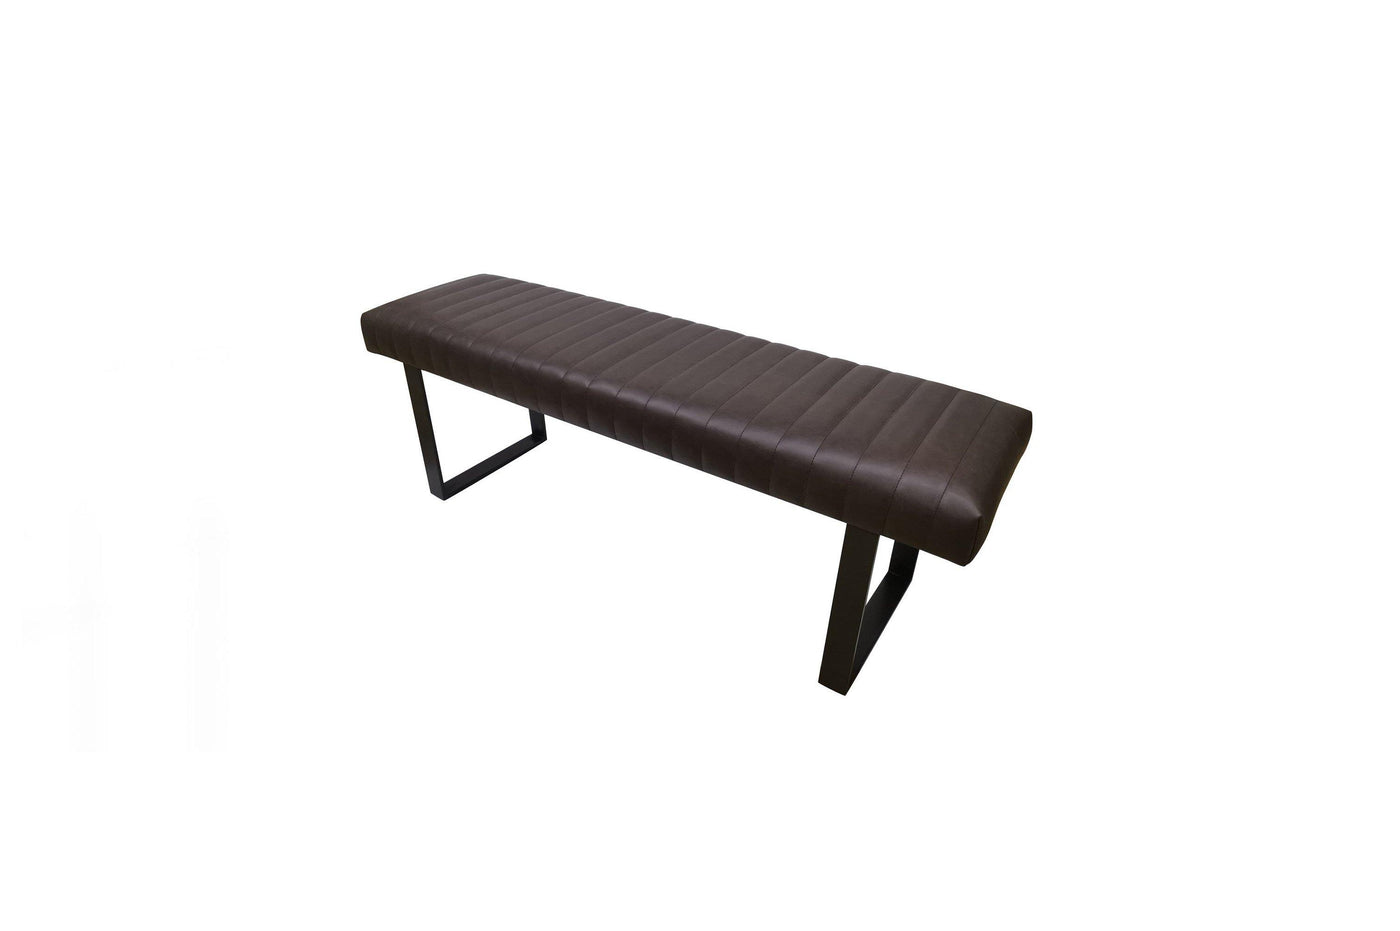 Hans leather bench Hoya Casa Hoyacasa.ca couch sofa bed 4 seater sectional table kitchen table love seat sofa bed matress Toronto Canada manufactures home decoration frames indoor Ottoman